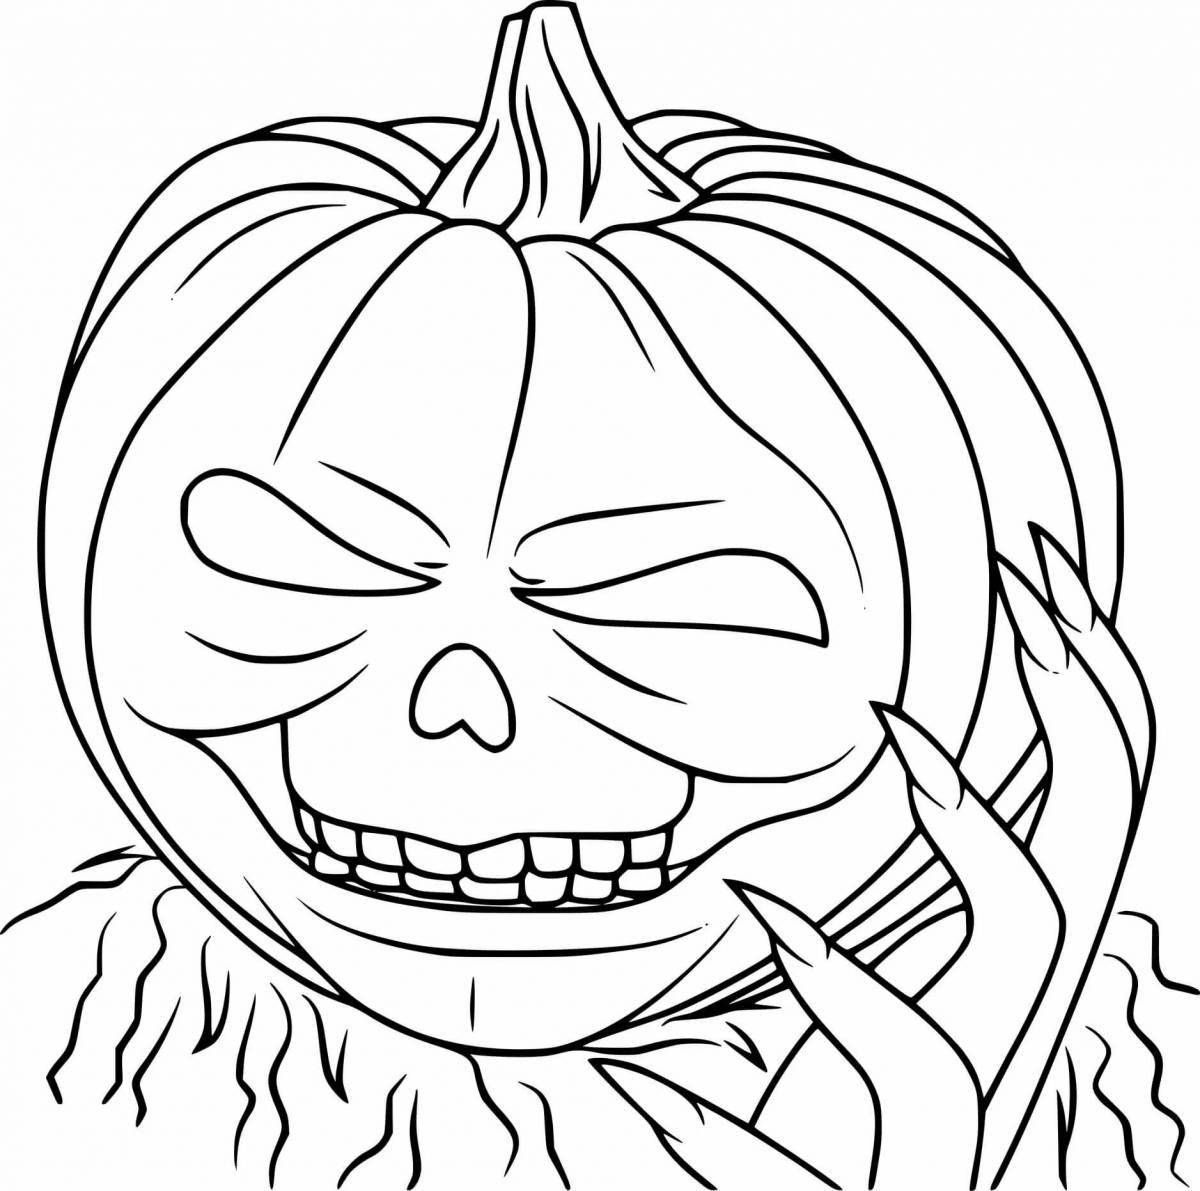 Nerving horror coloring book